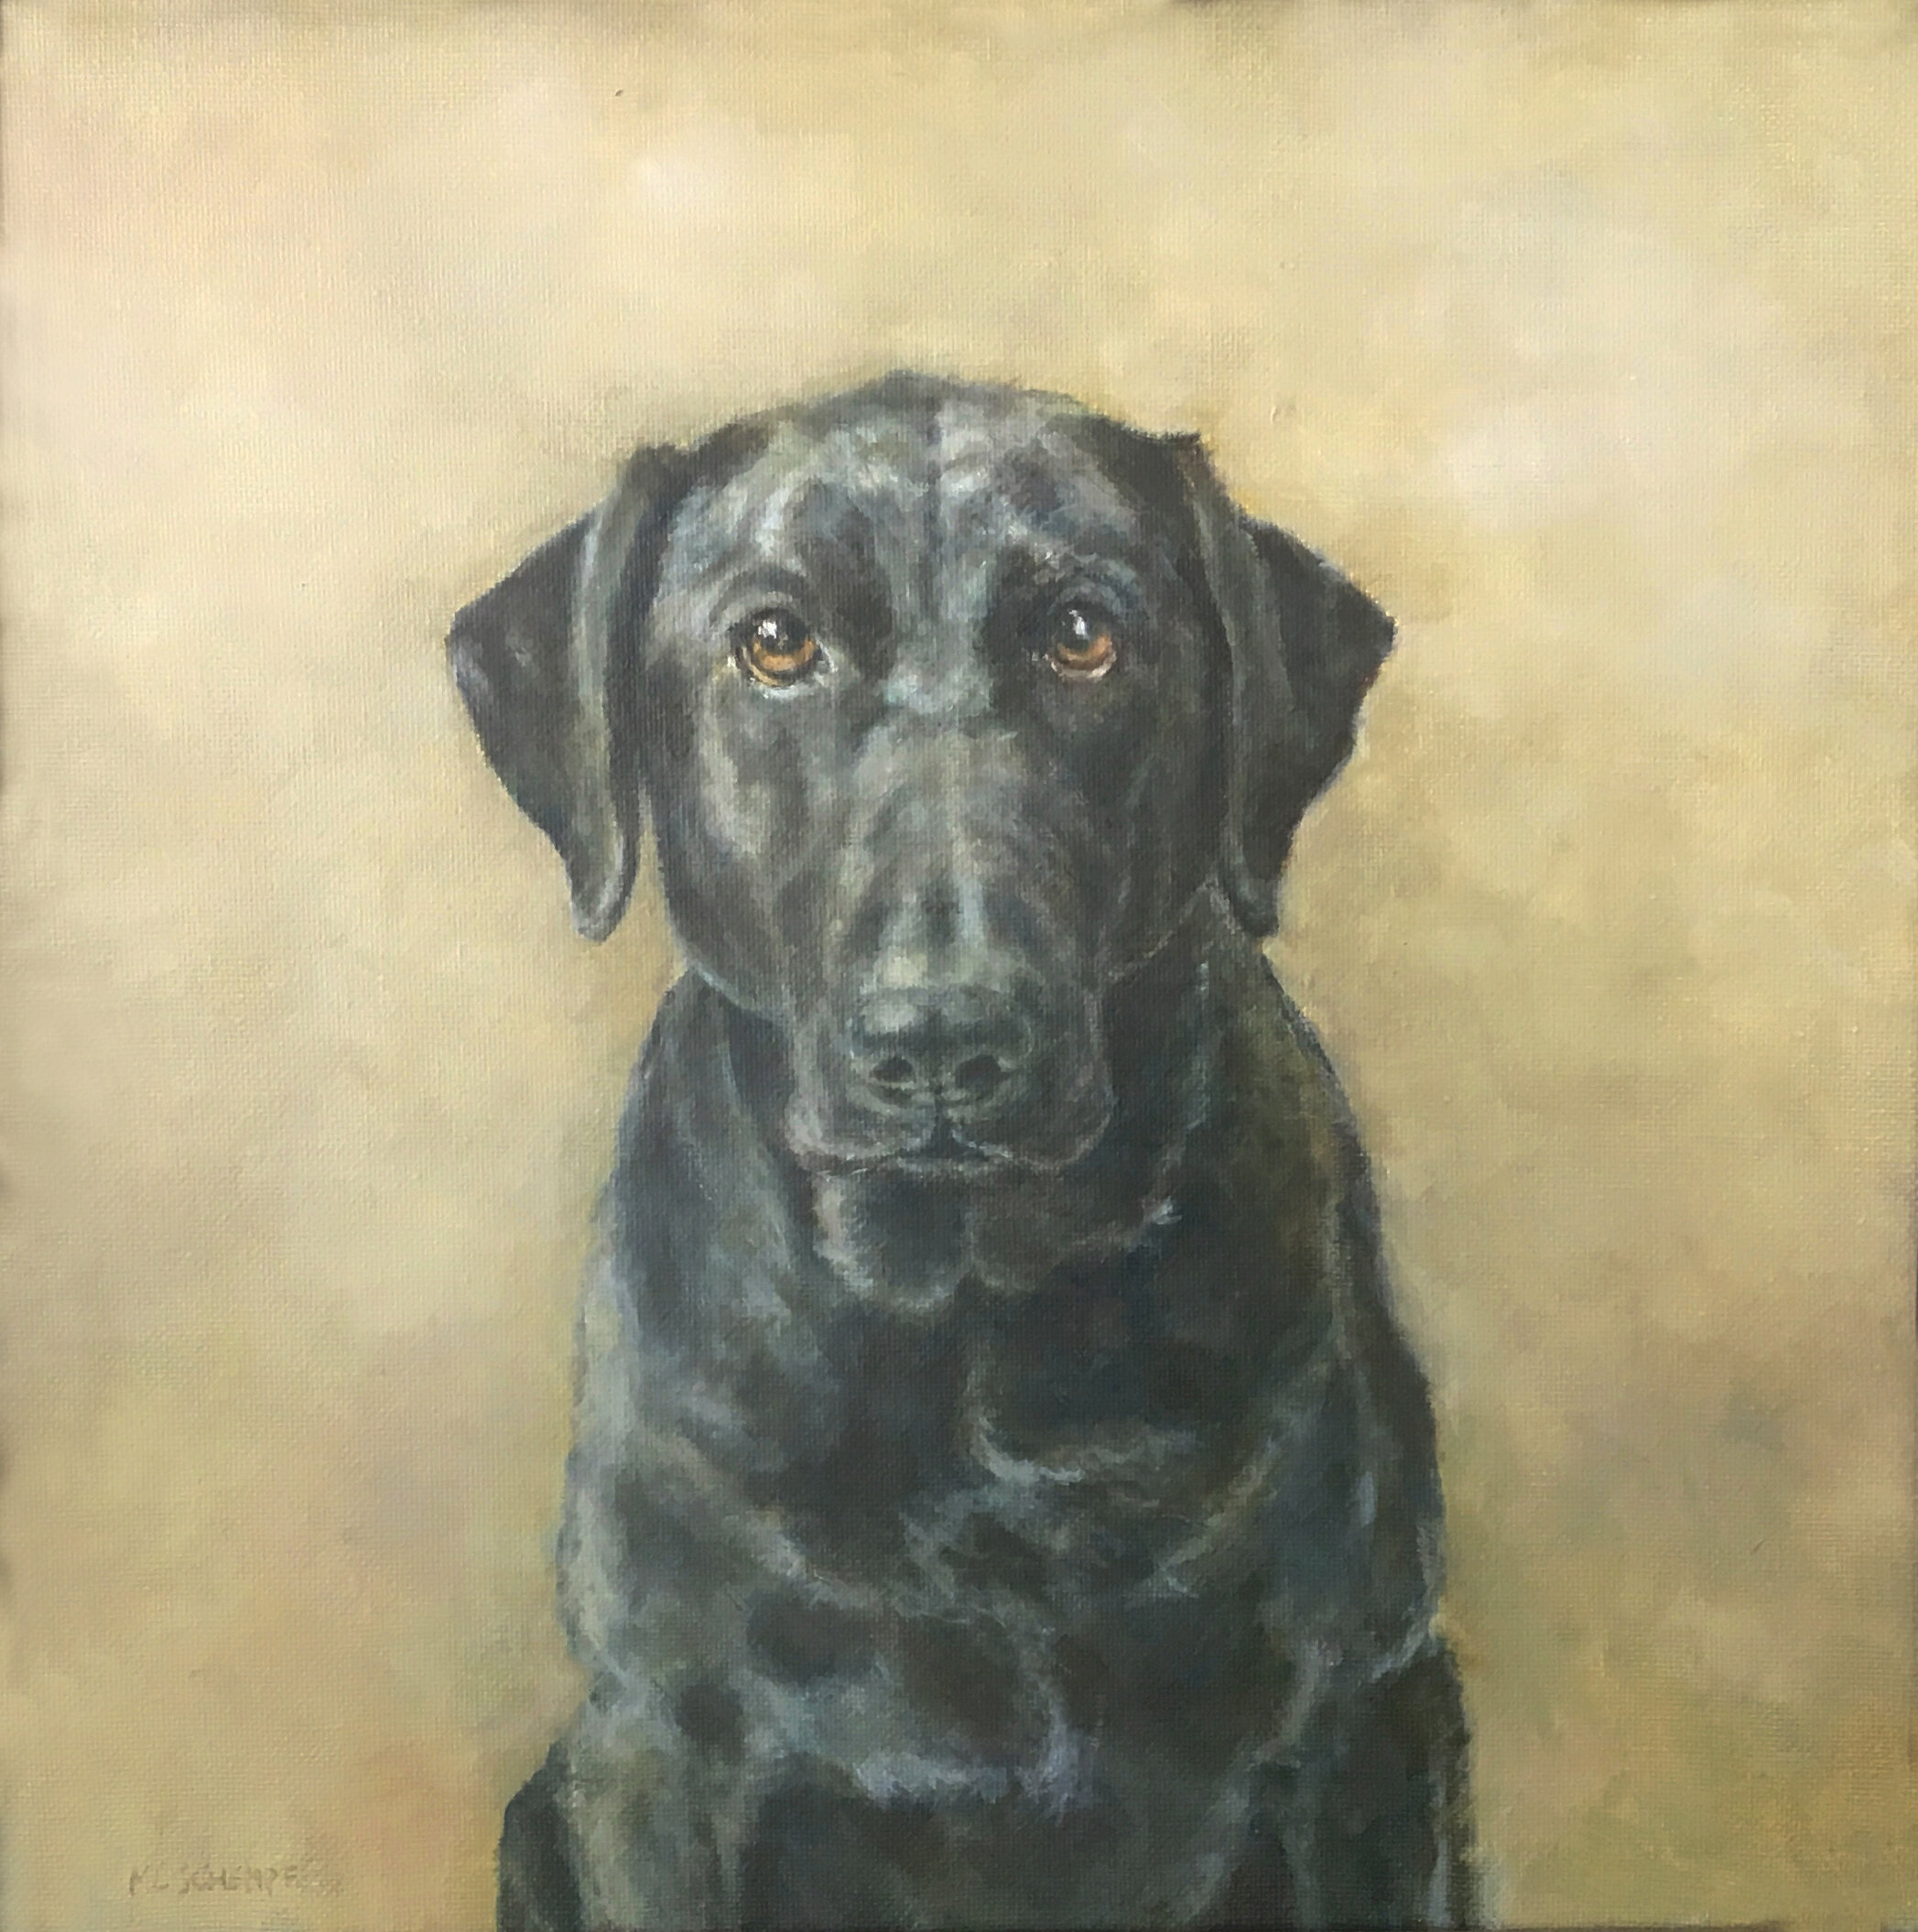  Mary Lou Schempf  Bessie,  12” x 12”, oil on linen  (private collection)  